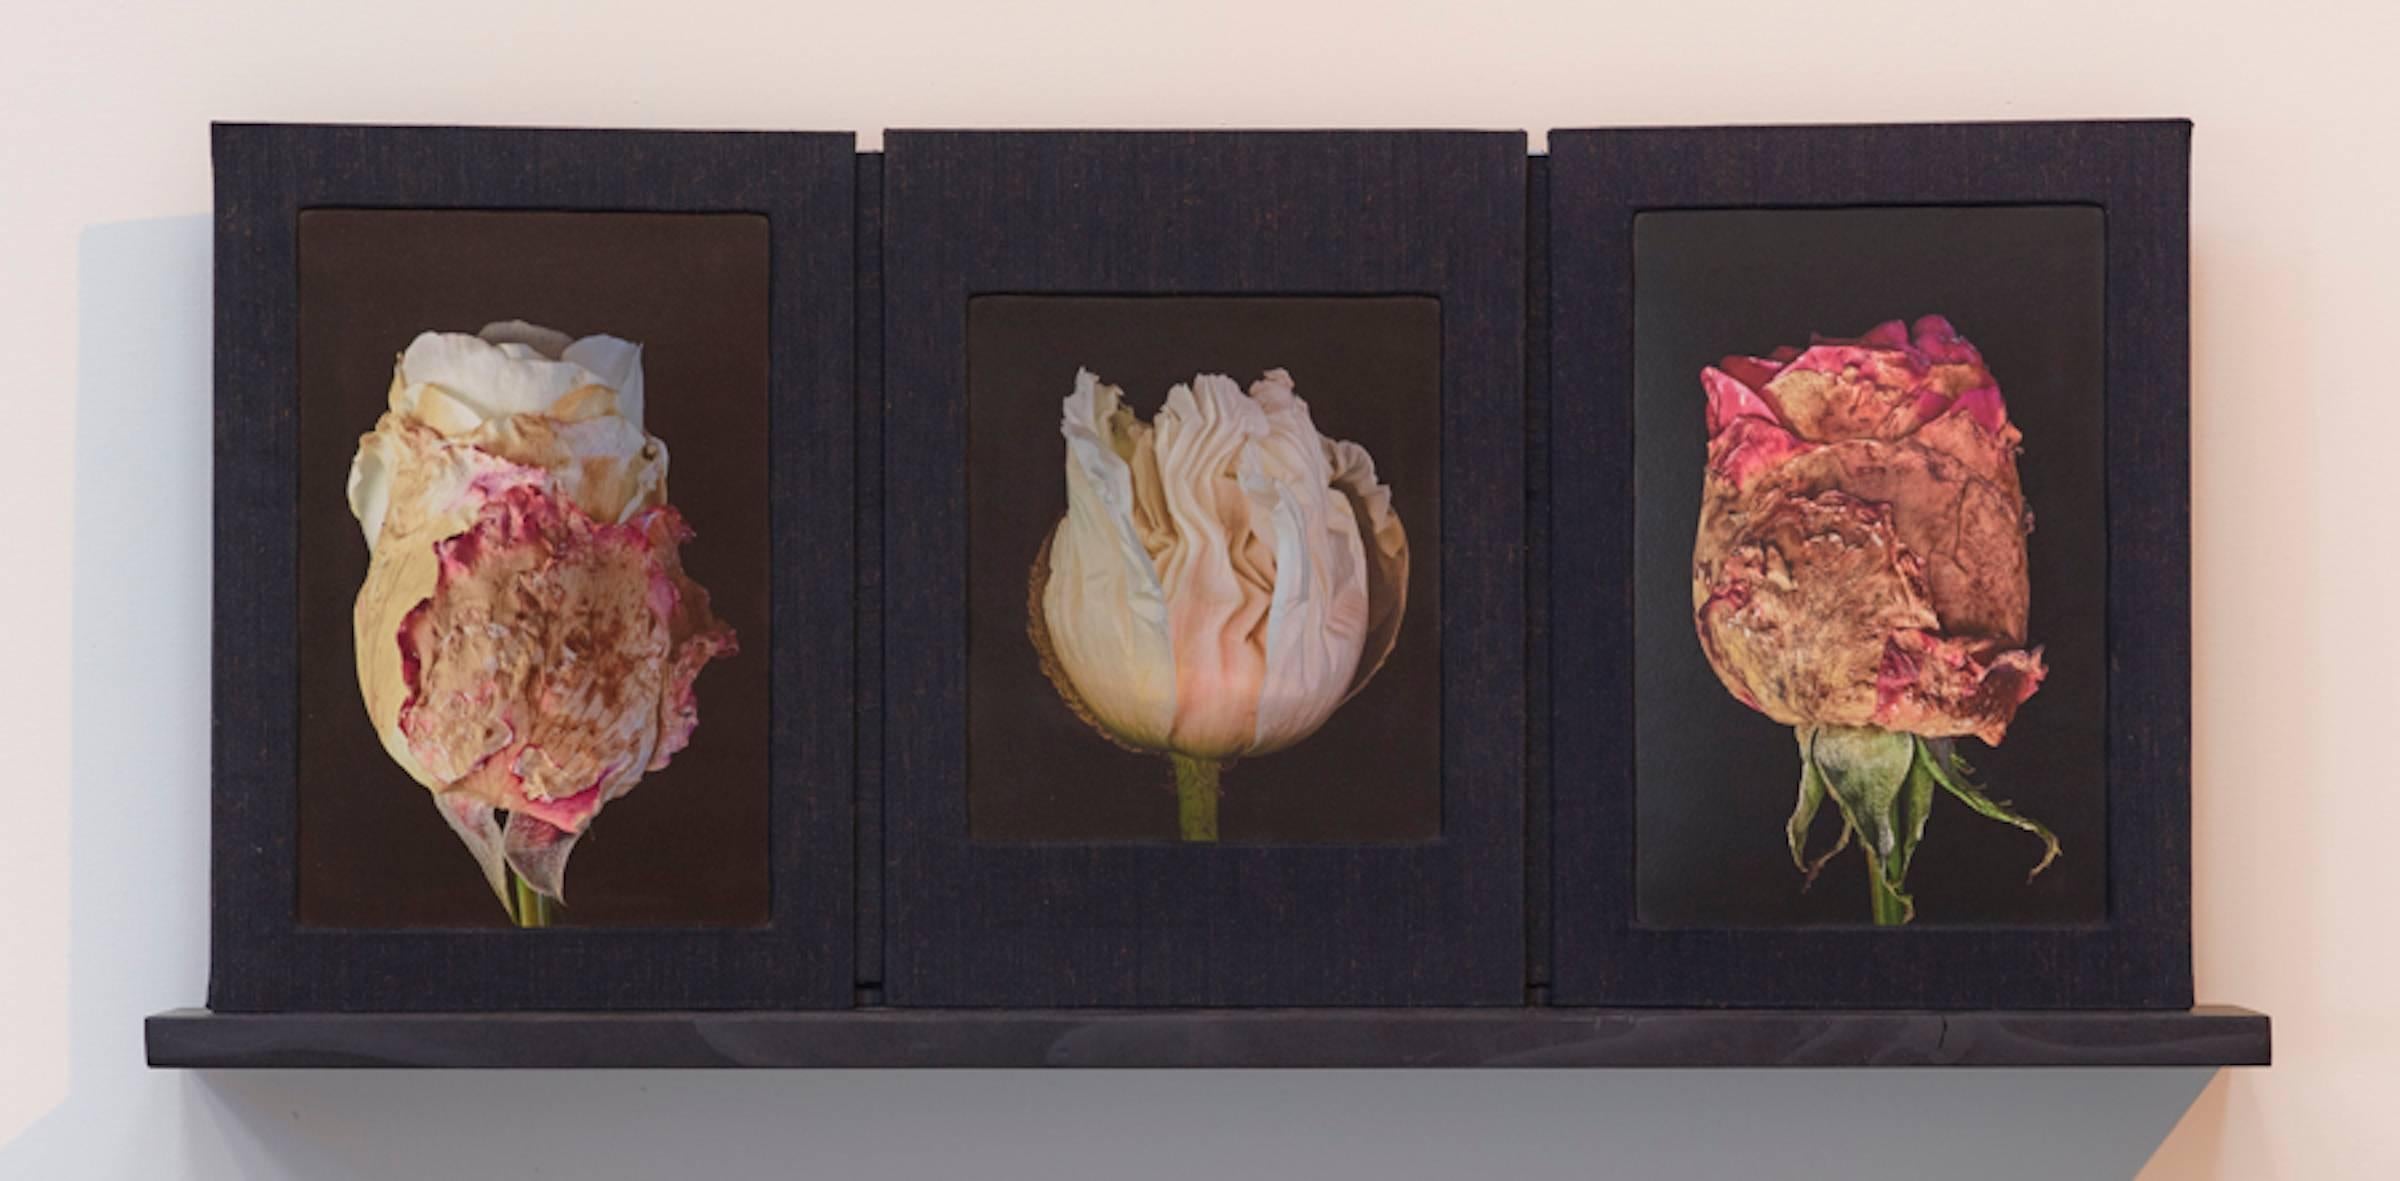 Budding / Rose photographic wall sculpture book - Contemporary Photograph by Roger Jordan